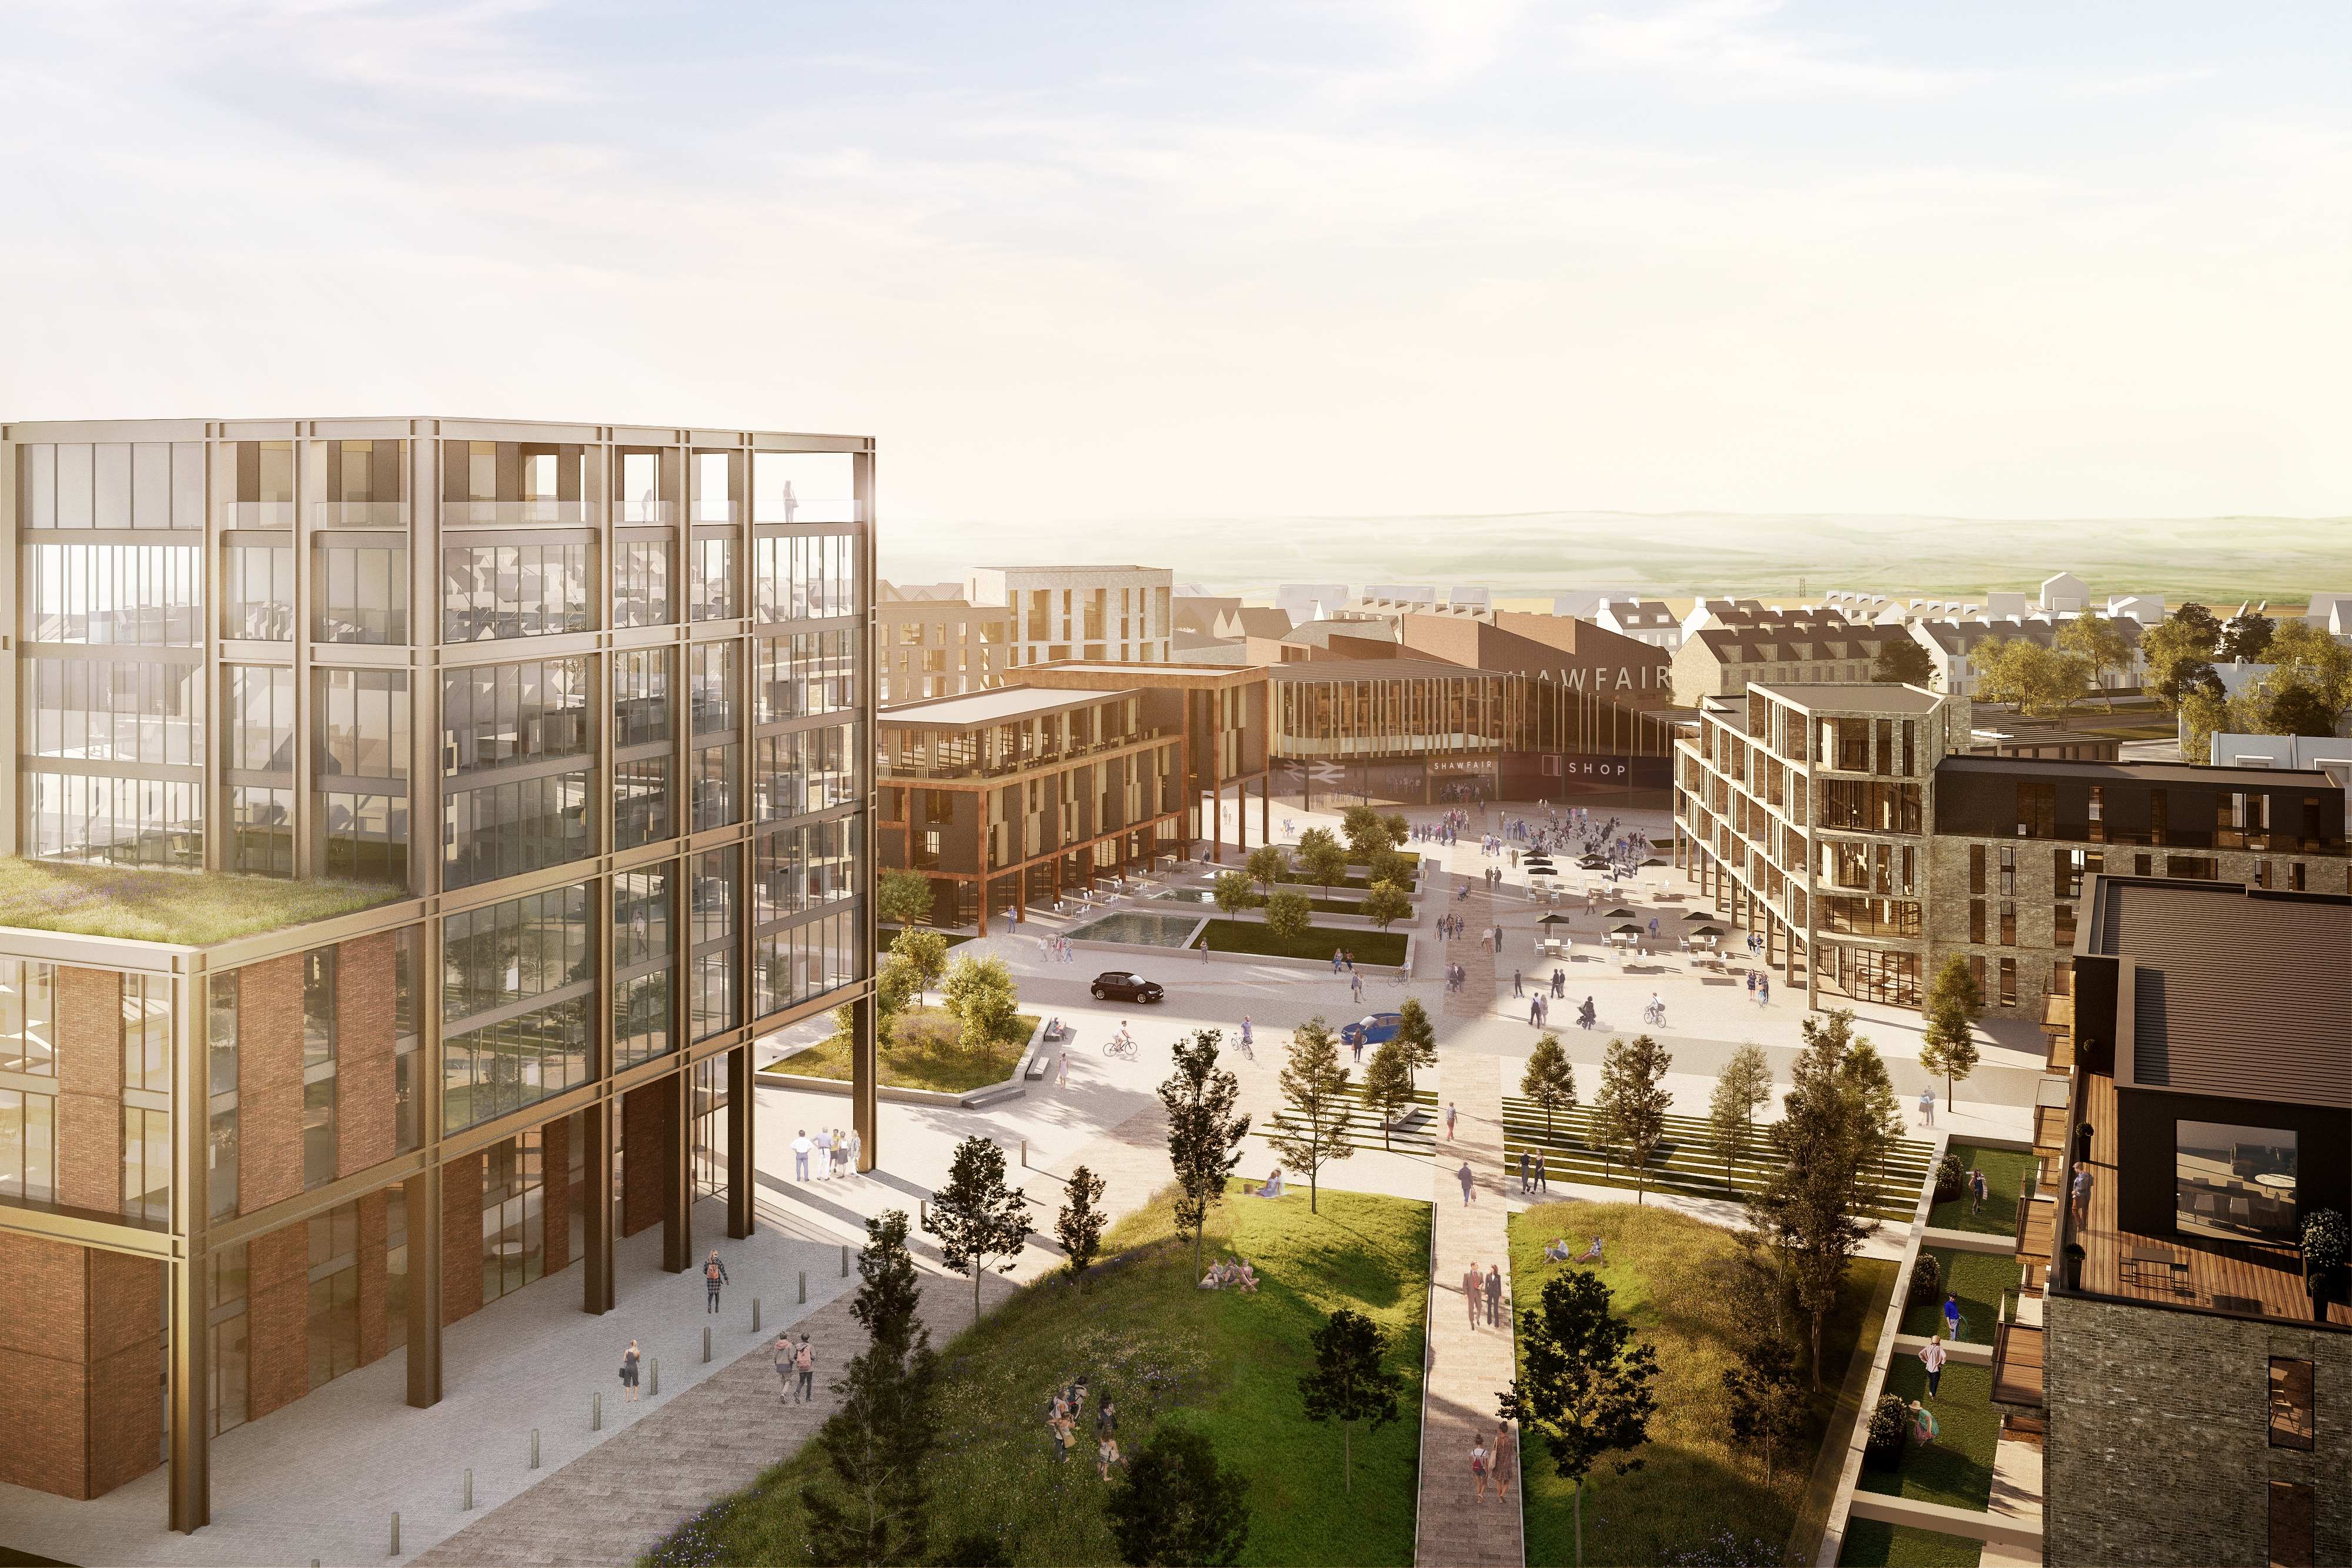 The proposed development plans for Shawfair see 4,000 new homes, businesses and retail outlets in a landscaped environment surrounding a new town centre and railway station. (Photo credit: Shawfair LLP)